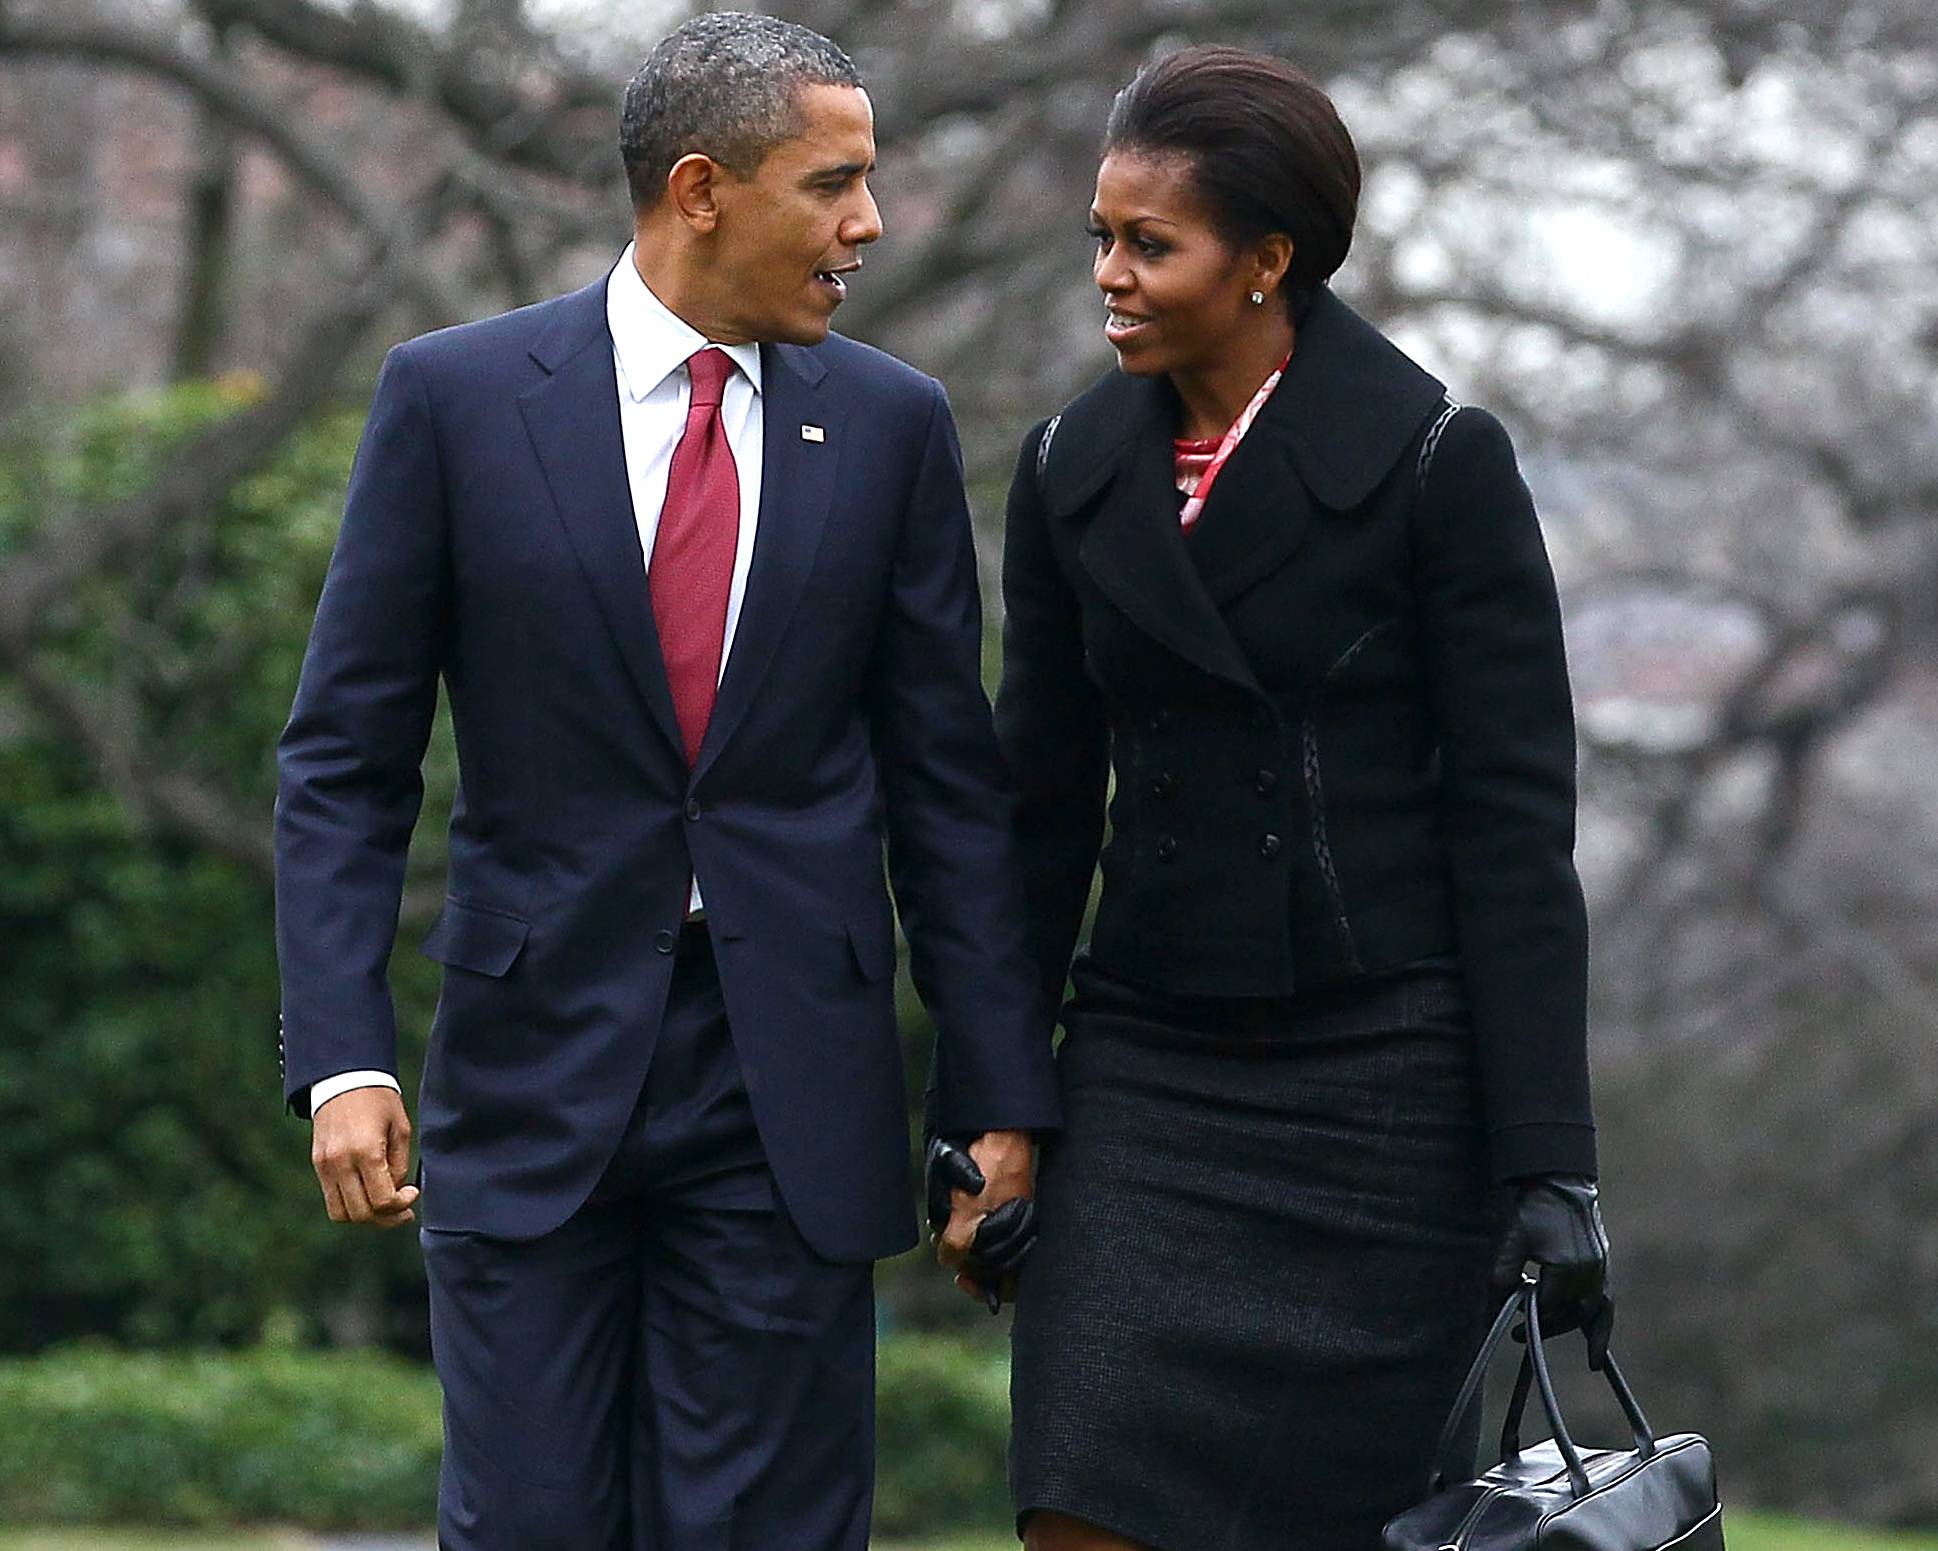 Lifelong Loves - Just in time for Valentine’s Day, BET.com looks back at noteworthy Black power couples in the world of politics, including civil rights activists Medgar and Myrlie Evers, Massachusetts Gov. Deval Patrick and his wife Diane, and our country’s most powerful (... and famous!) duo, President Barack Obama and First Lady Michelle Obama. Click through for more political sweethearts. —Britt MiddletonPresident Barack Obama and First Lady Michelle Obama. (Photo by Mark Wilson/Getty Images)